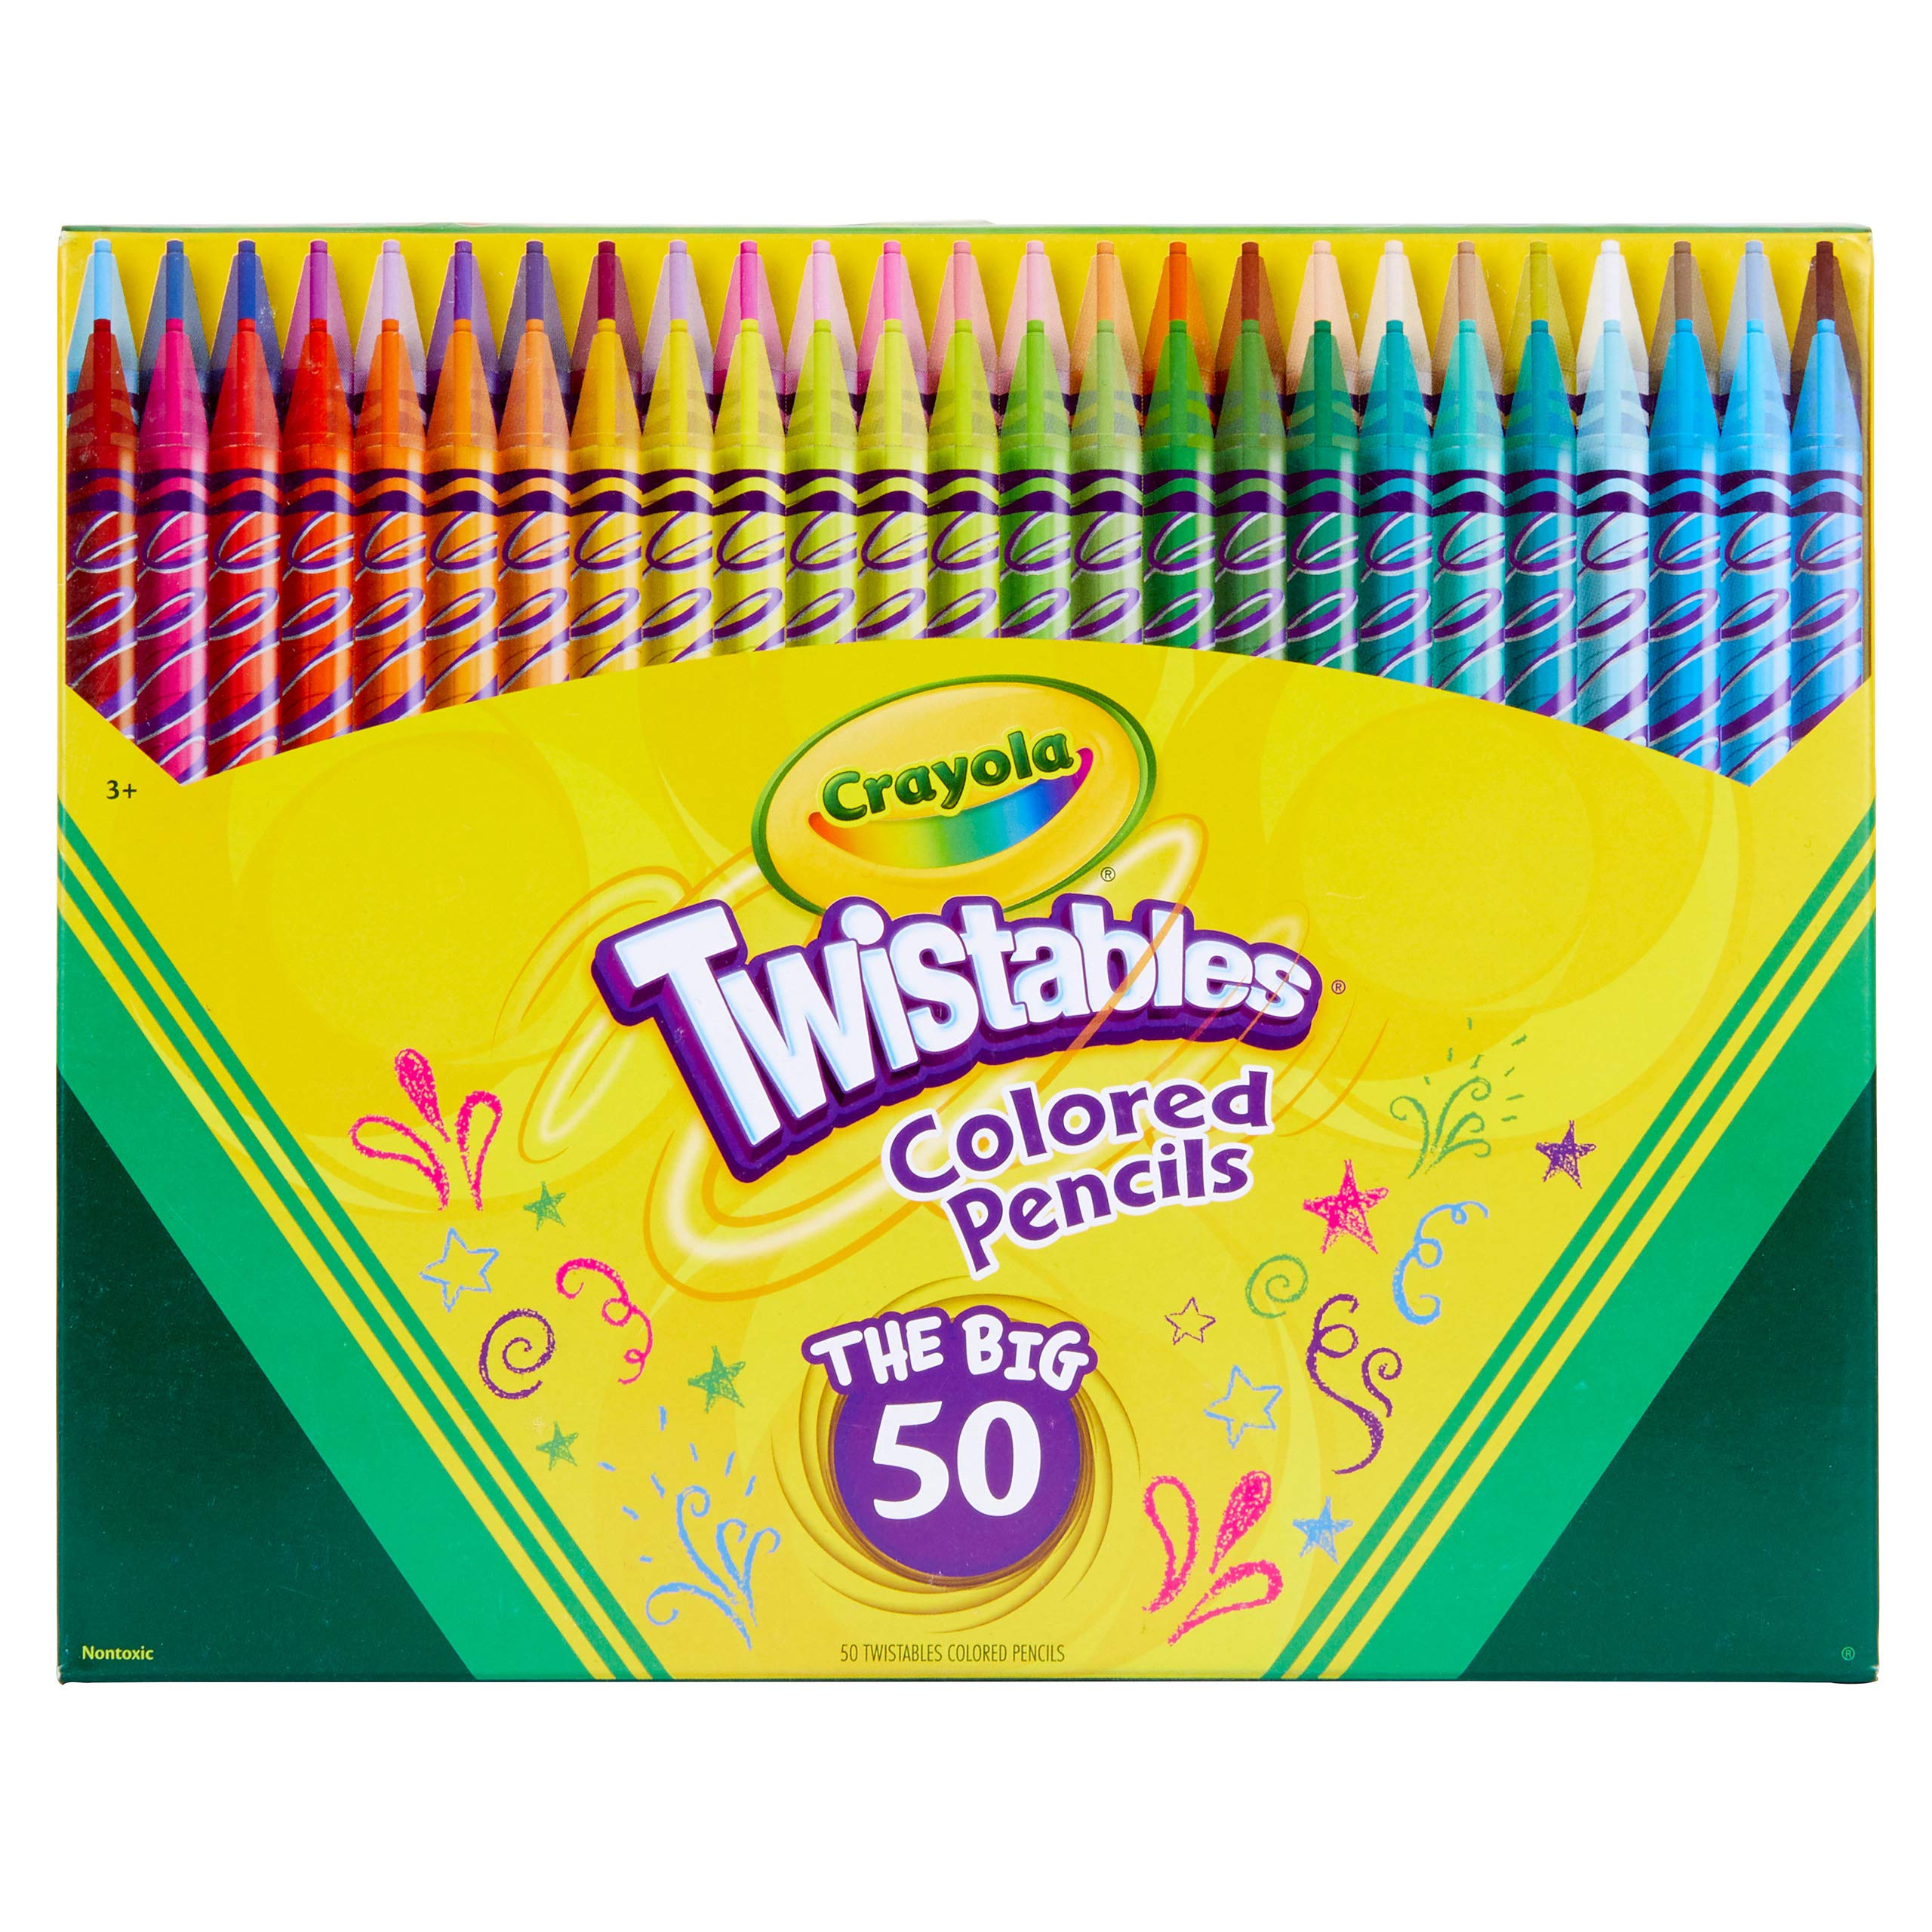 Crayola Twistables Colored Pencil Set (50ct), Kids Art Supplies, Colored Pencils For Kids, Cute Back to School Supplies, 4+ [Amazon Exclusive]